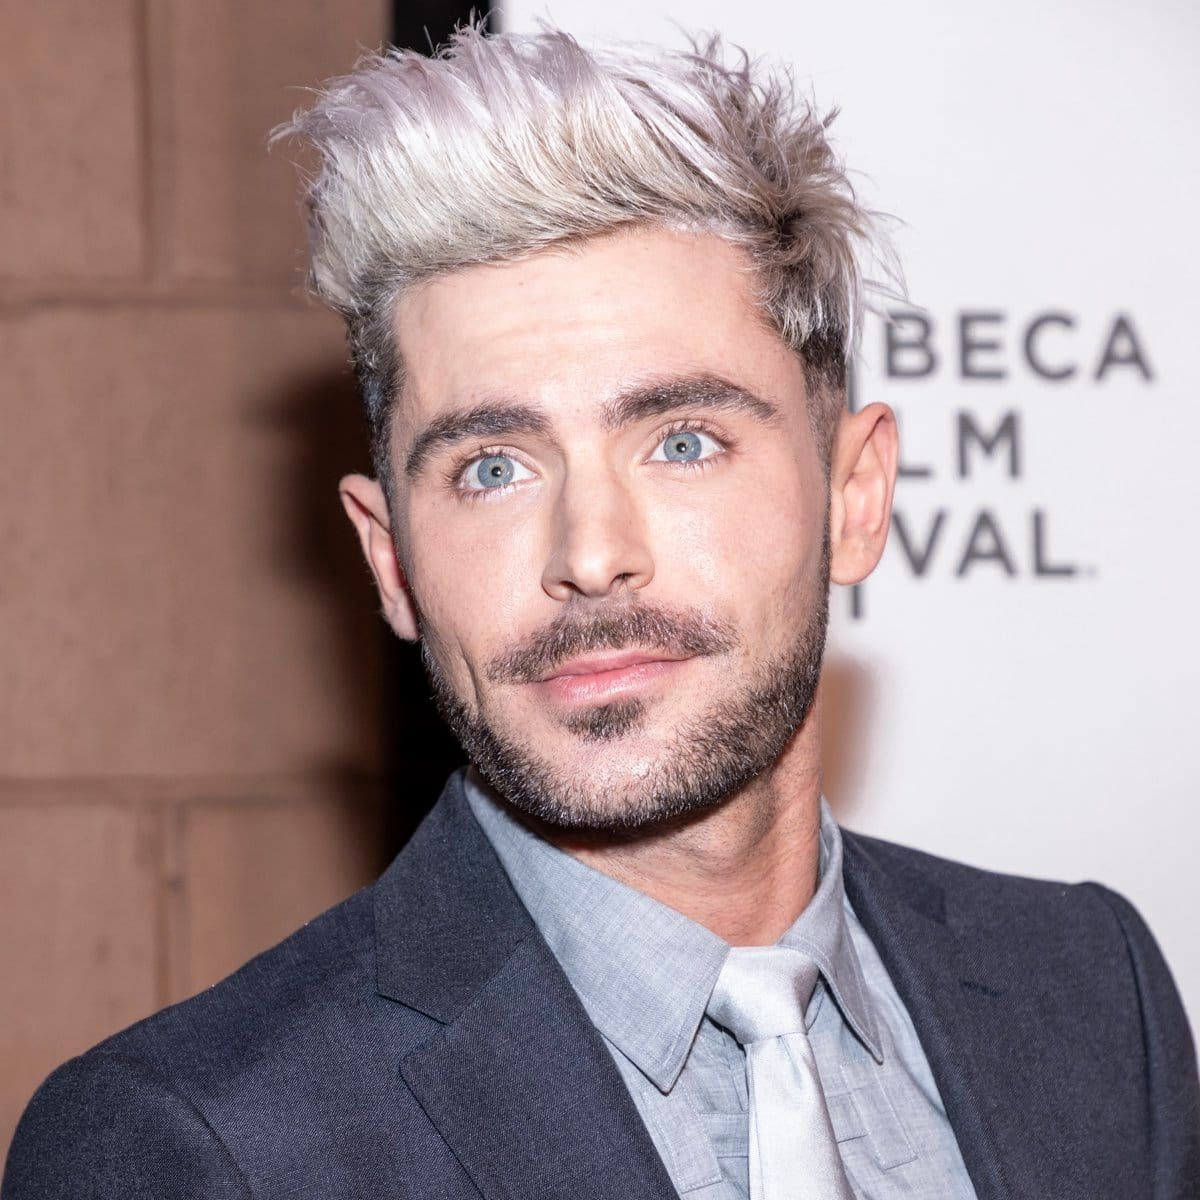 Zac Efron attends "Extremely Wicked, Shockingly Evil And